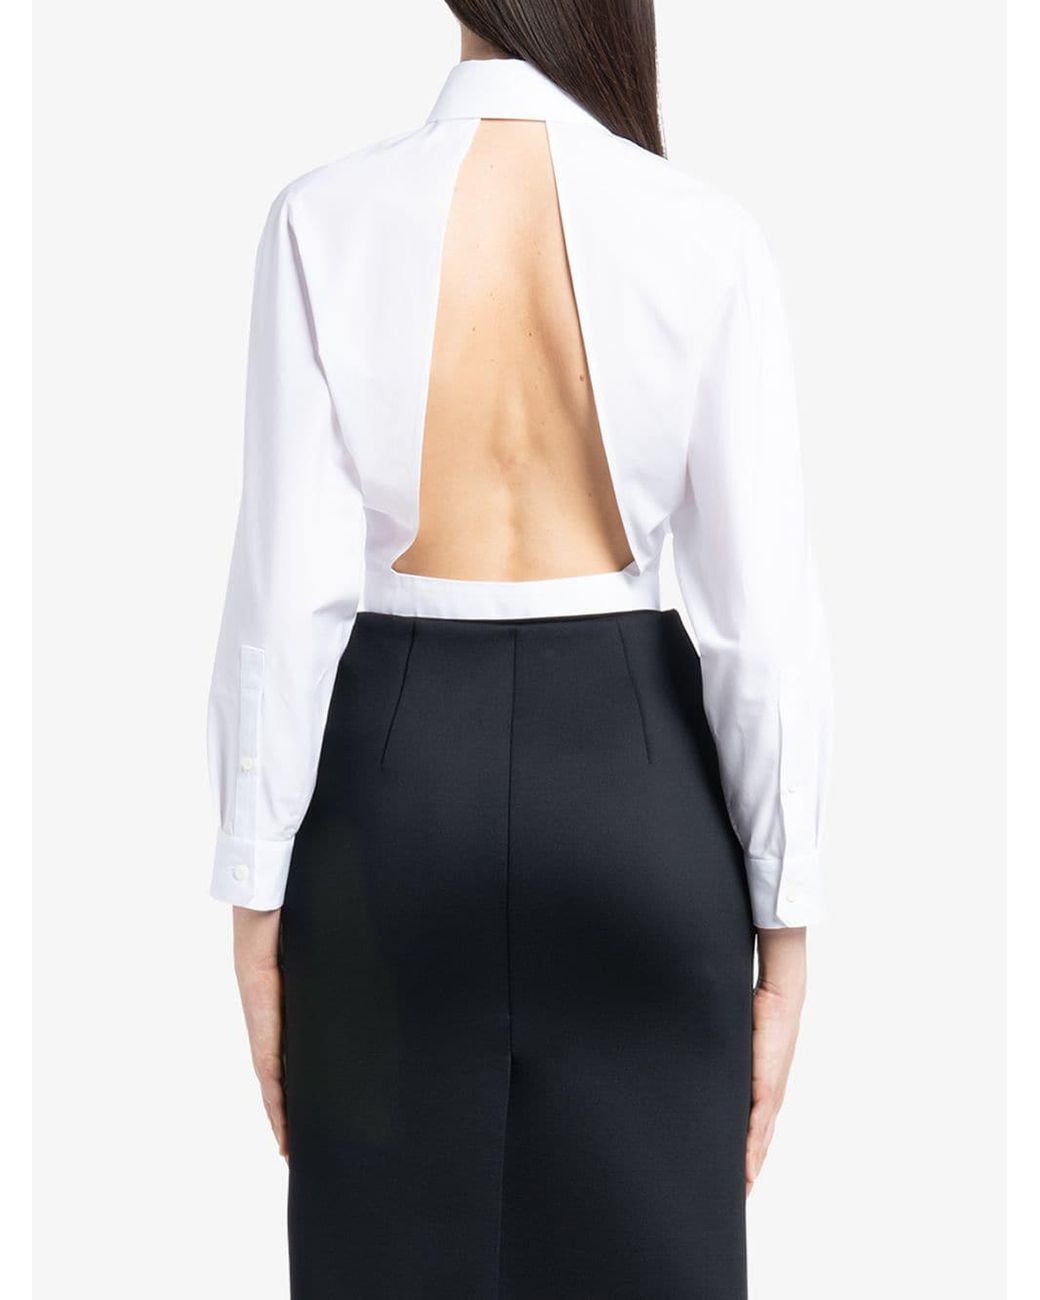 Prada Open-back Cropped Shirt in White | Lyst